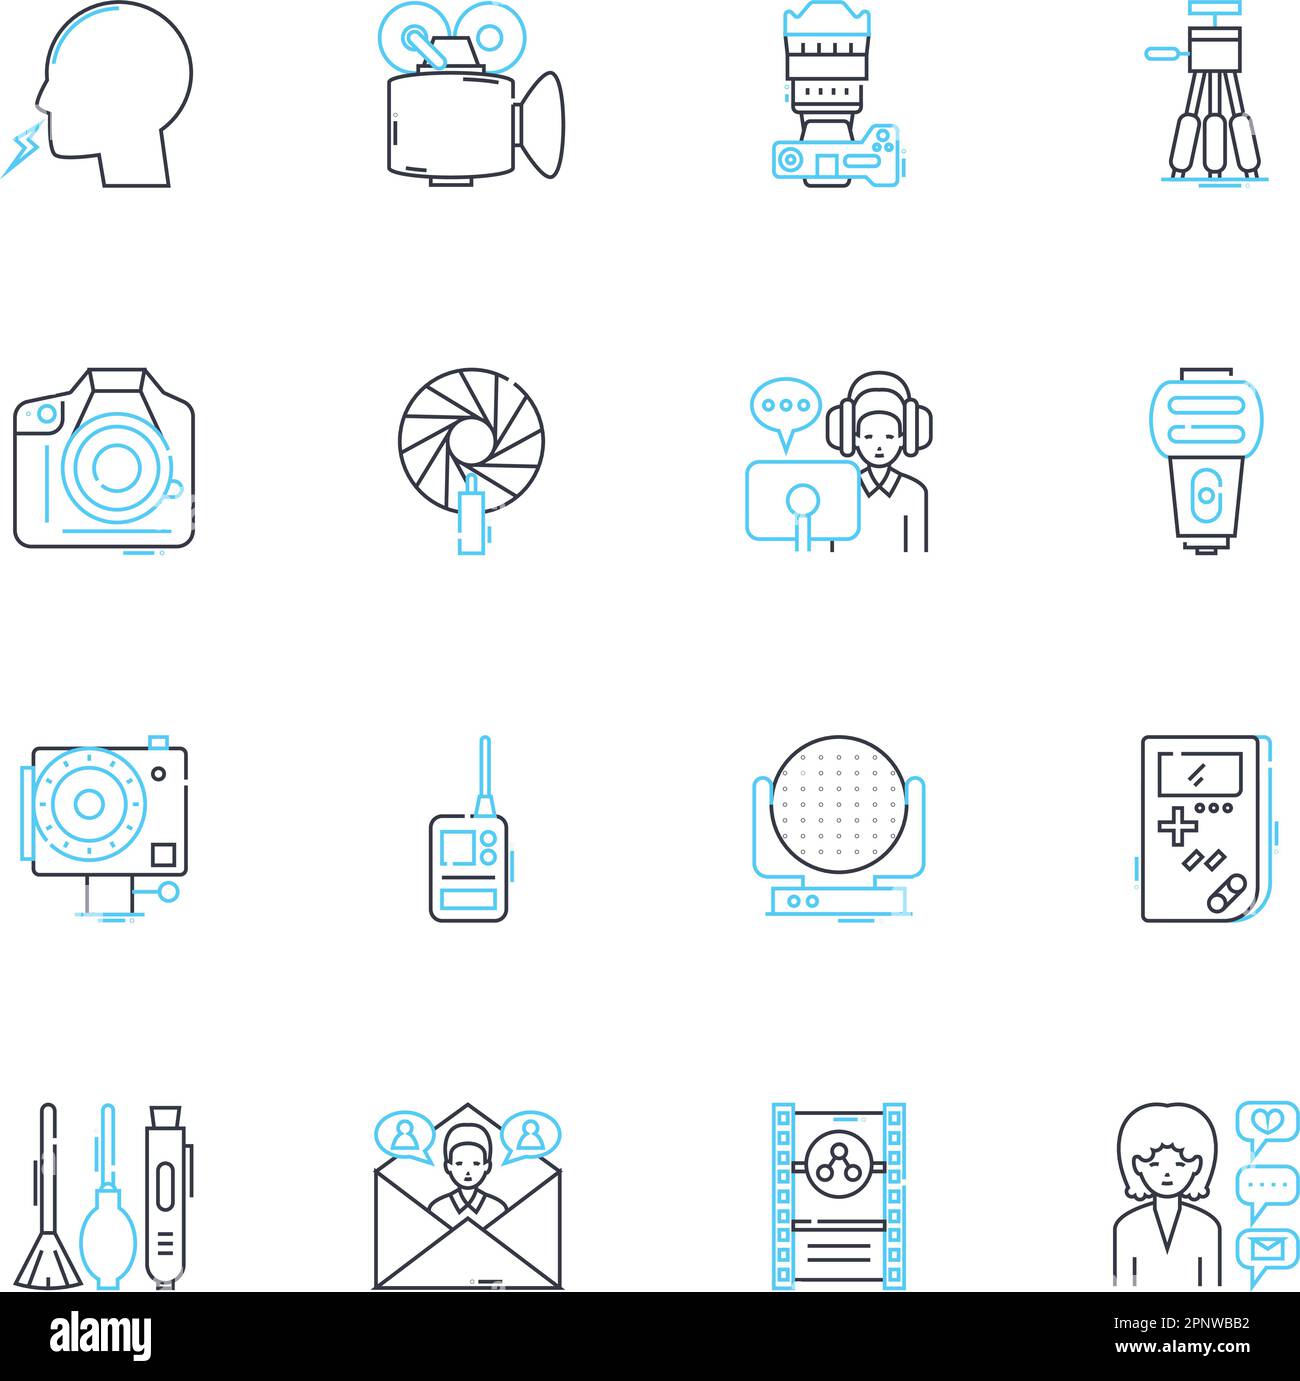 Camcorder linear icons set. Video, Recording, Lens, Resolution, Zoom, Editing, Audio line vector and concept signs. Memory,Screen,Stabilization Stock Vector